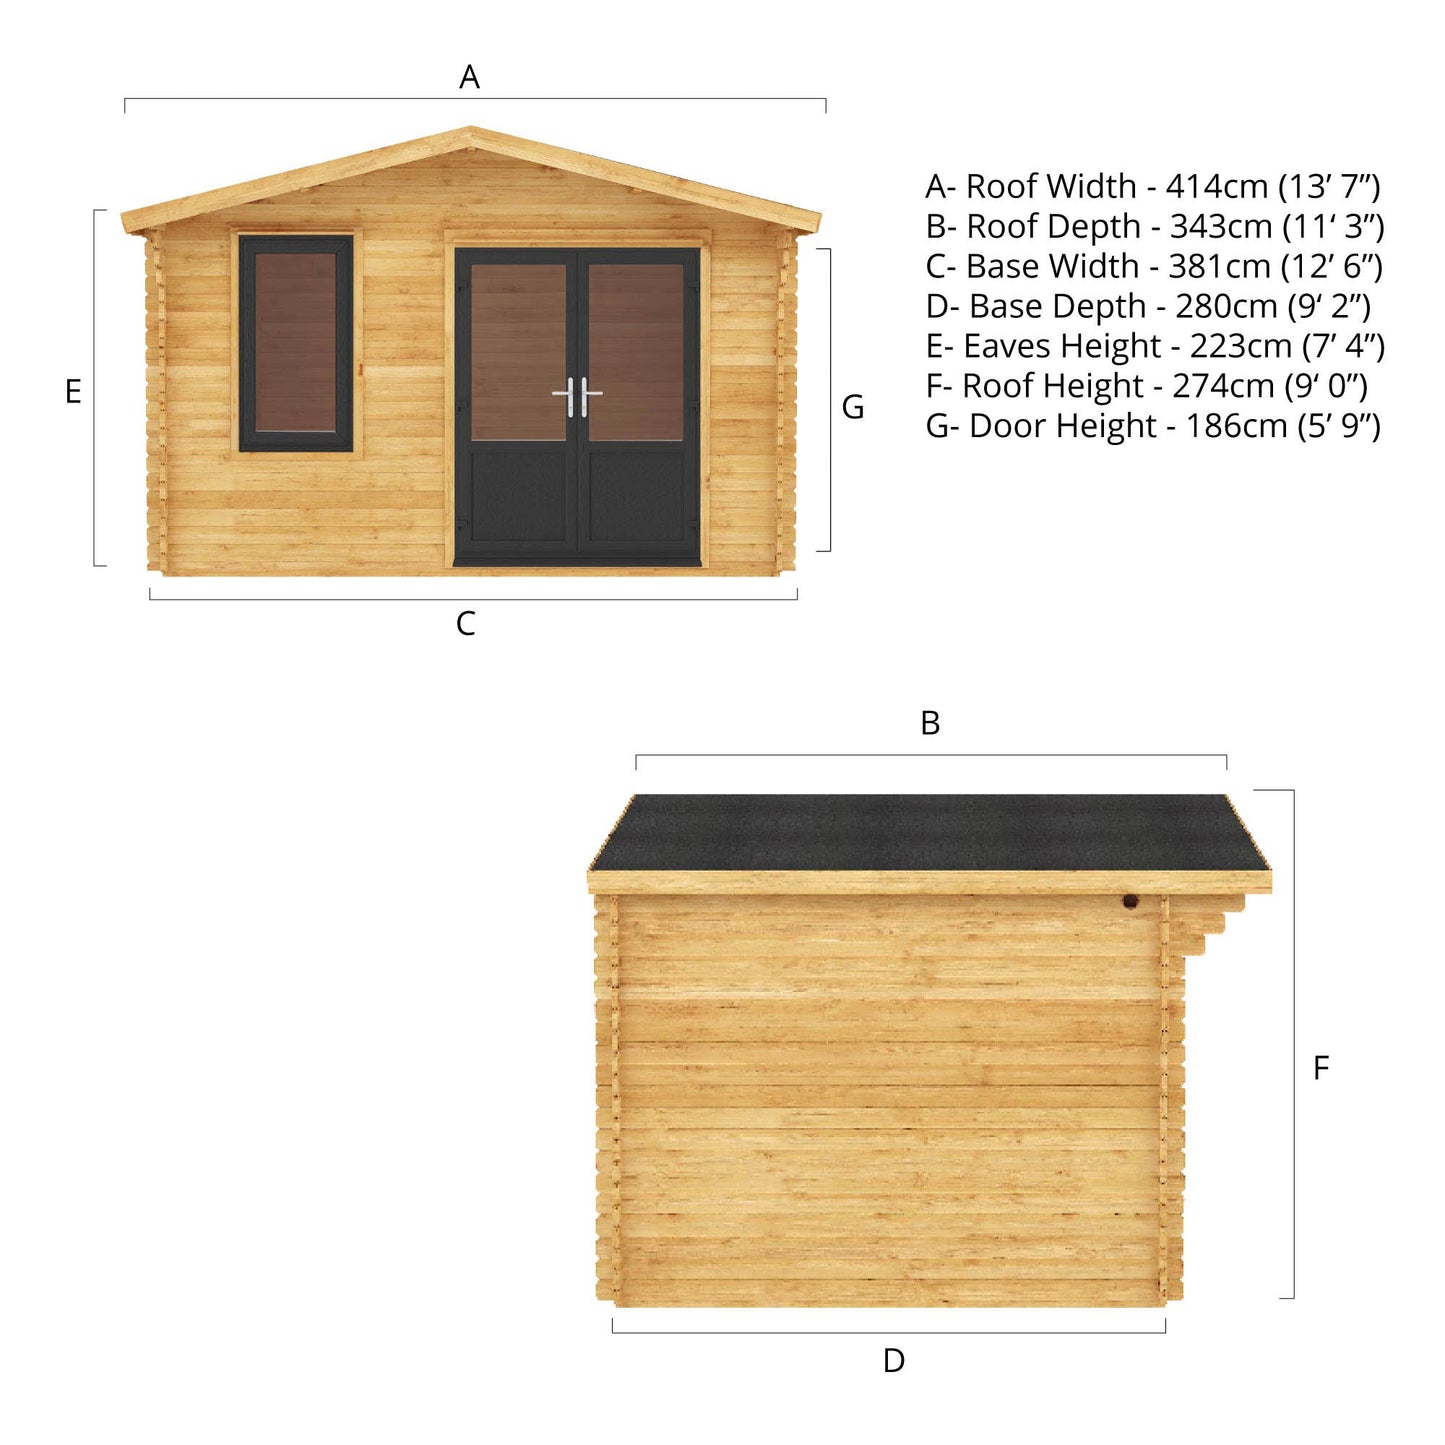 The 4m x 3m Sparrow Log Cabin with Anthracite UPVC